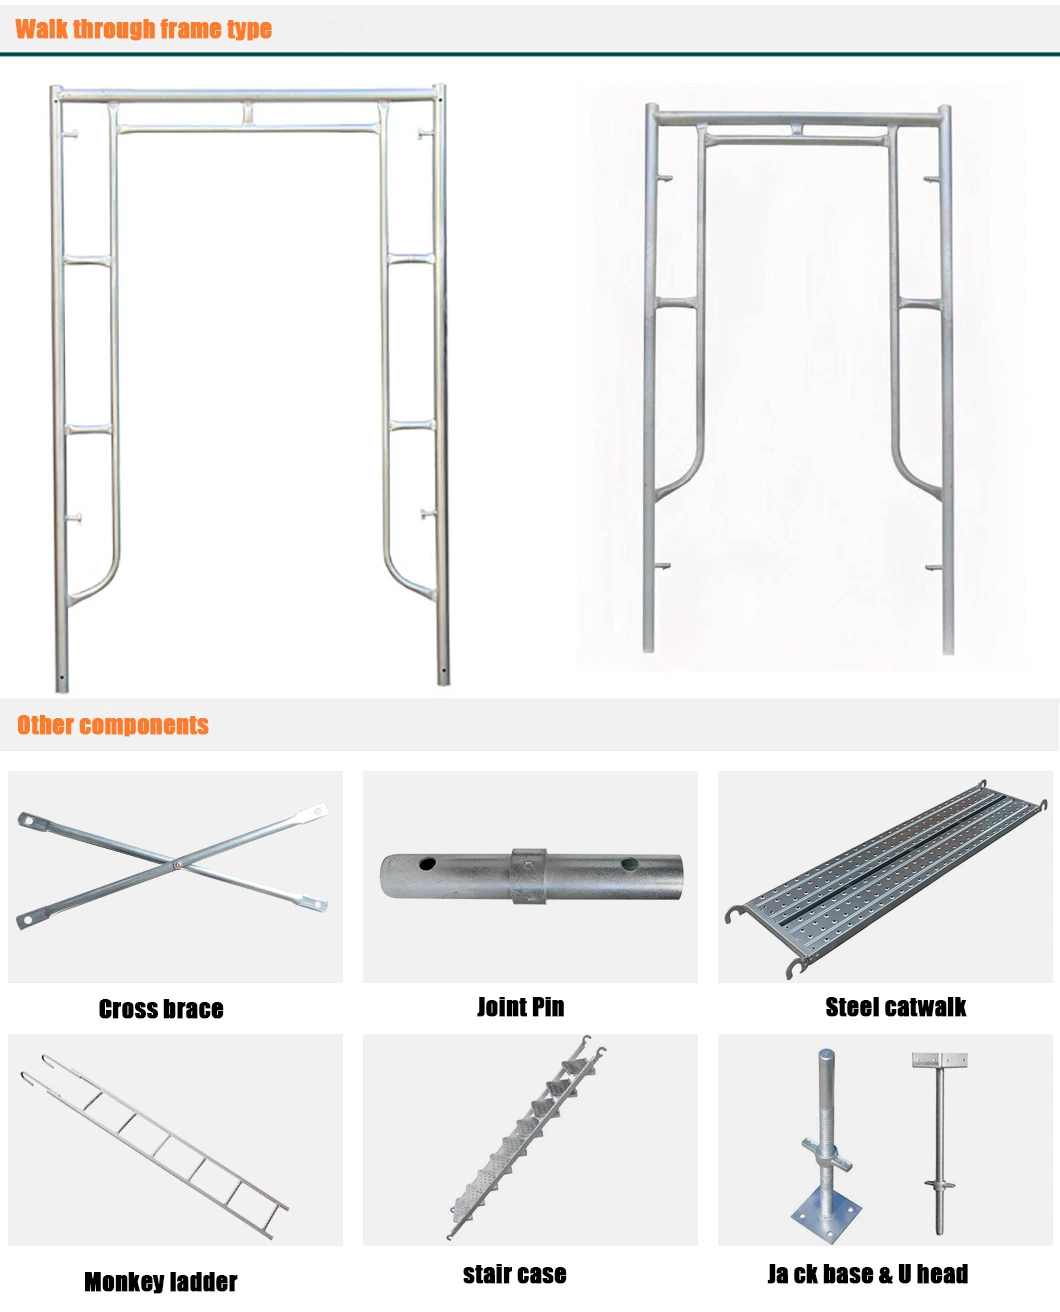 Construction Frame Pre-Galvanized/Painted Scaffolding H Frame Systems Cross Brace Mobile Walk-Through Frame Manson Frame Door Frame Scaffolding Frame System